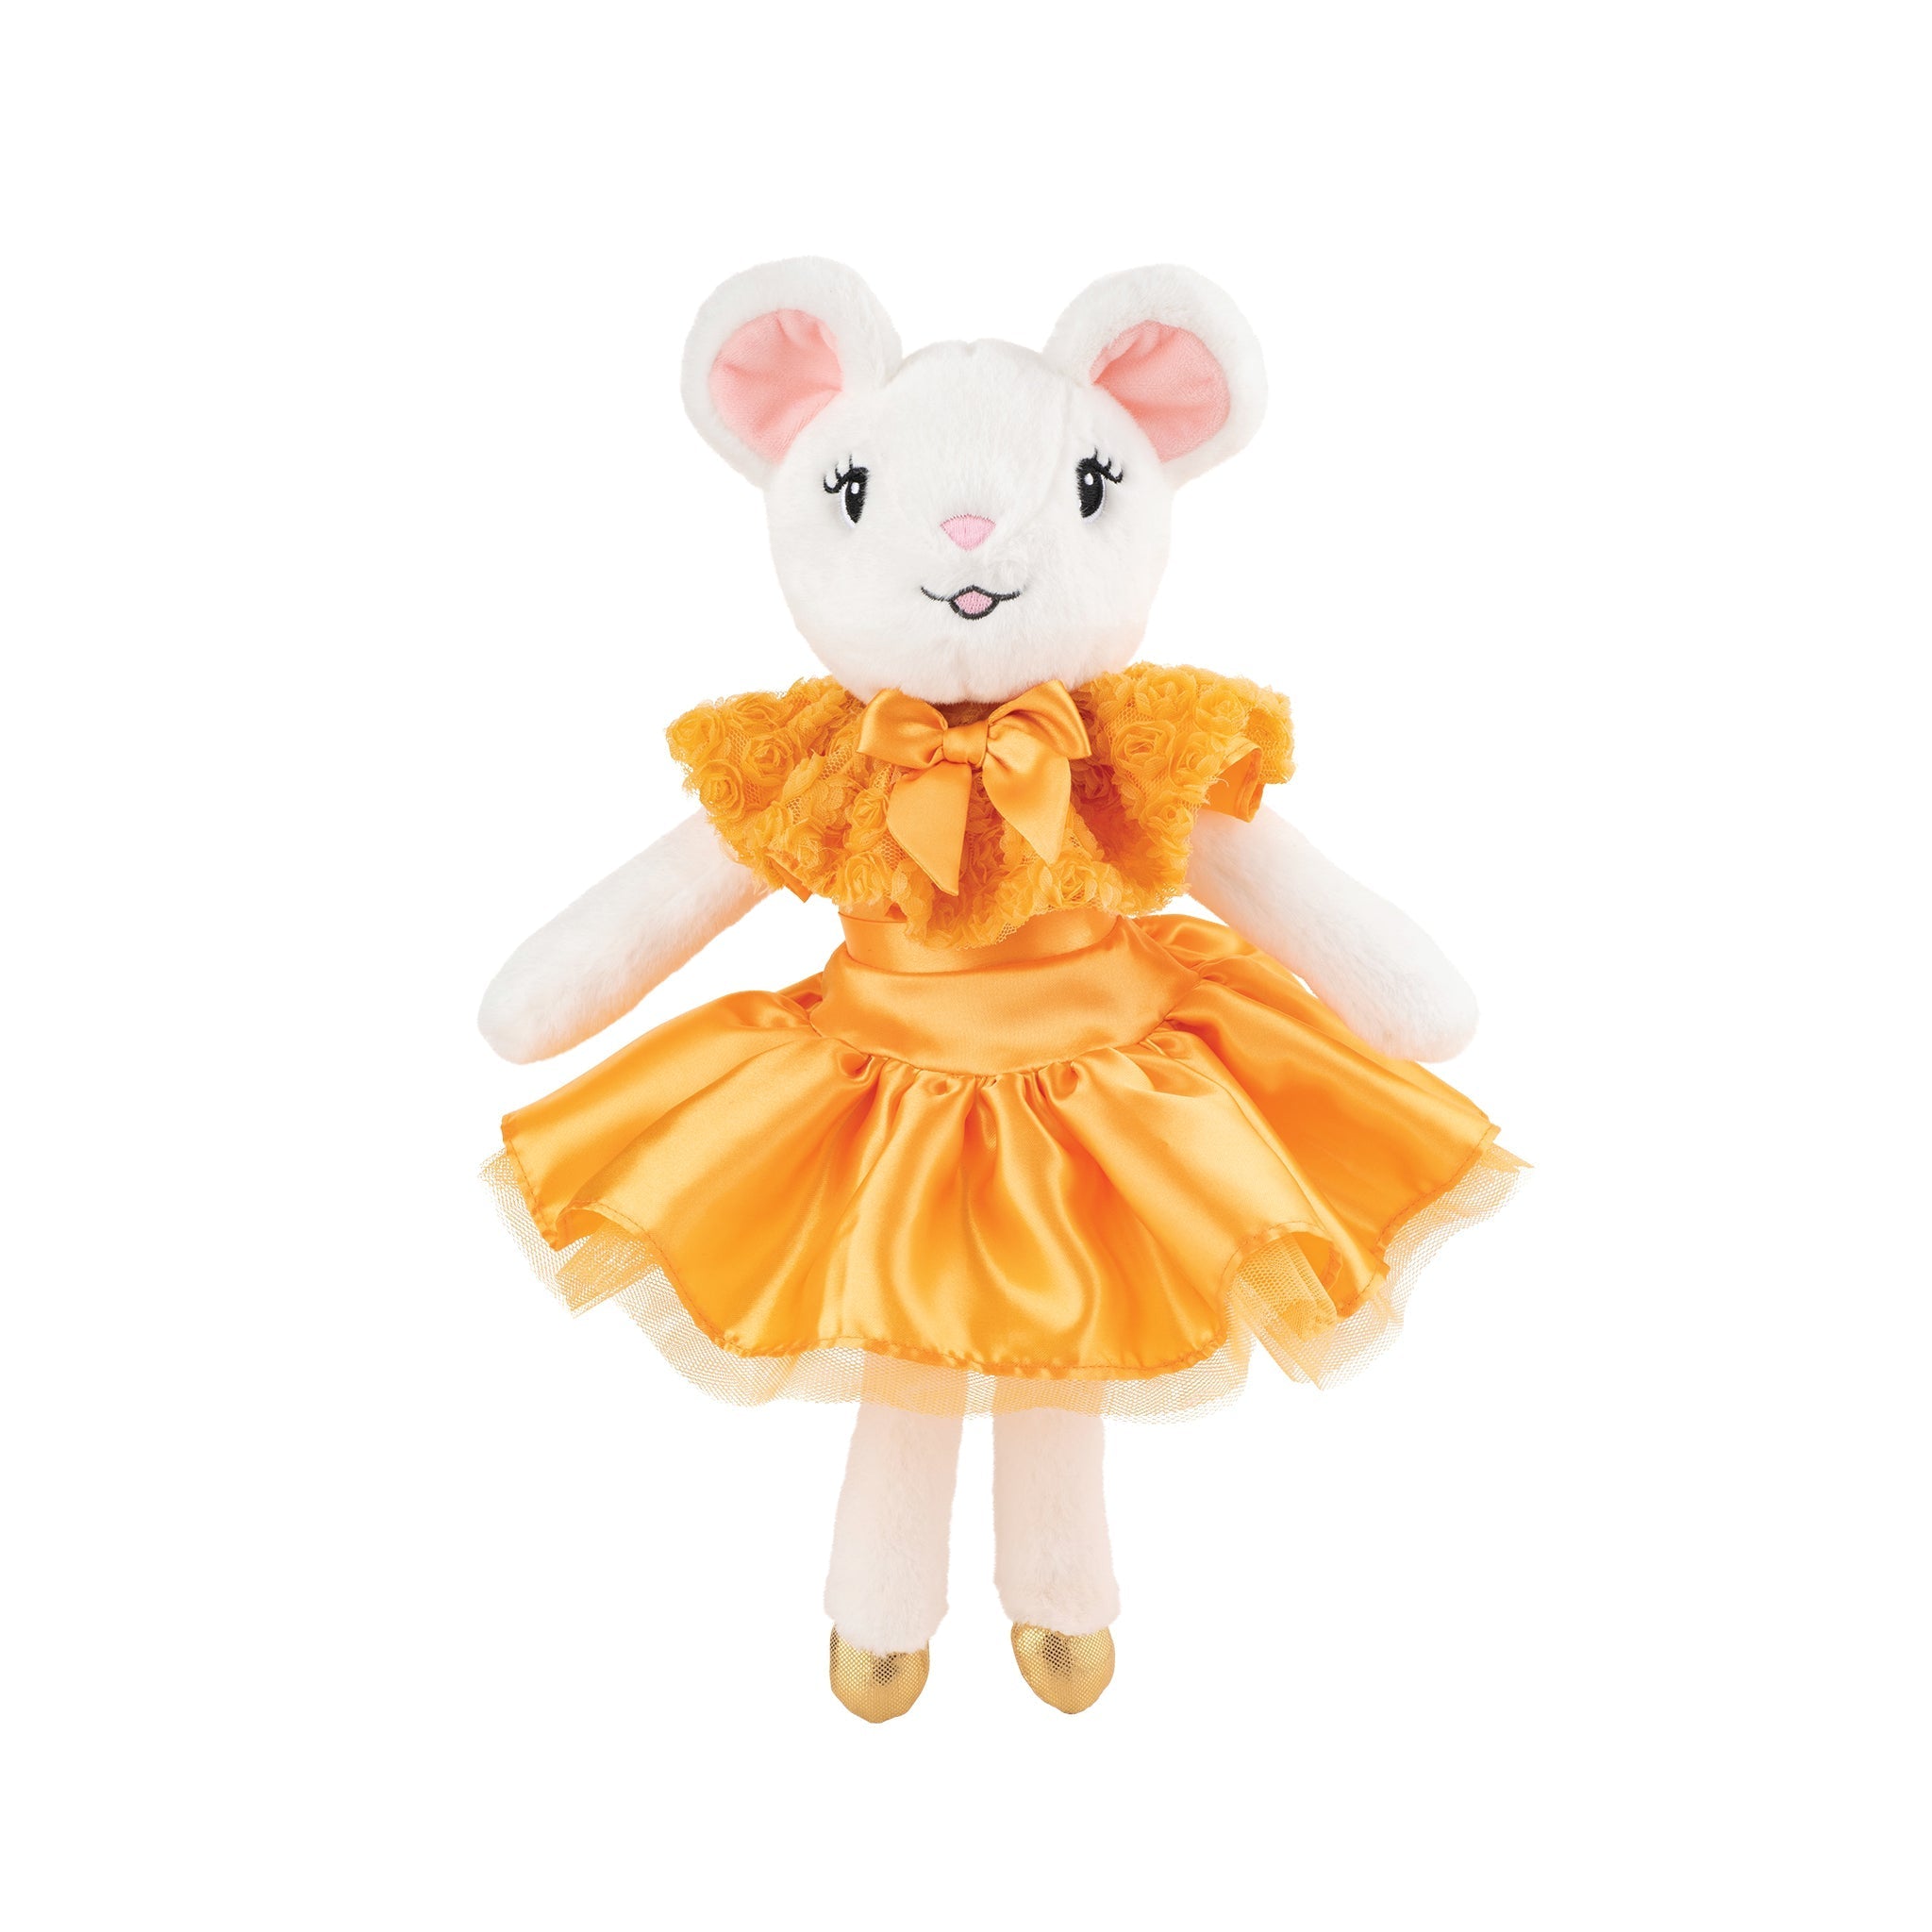 Claris The Mouse - Tangerine Plush Doll-Doll-SKU: CLAR2107 - Bunnies By The Bay